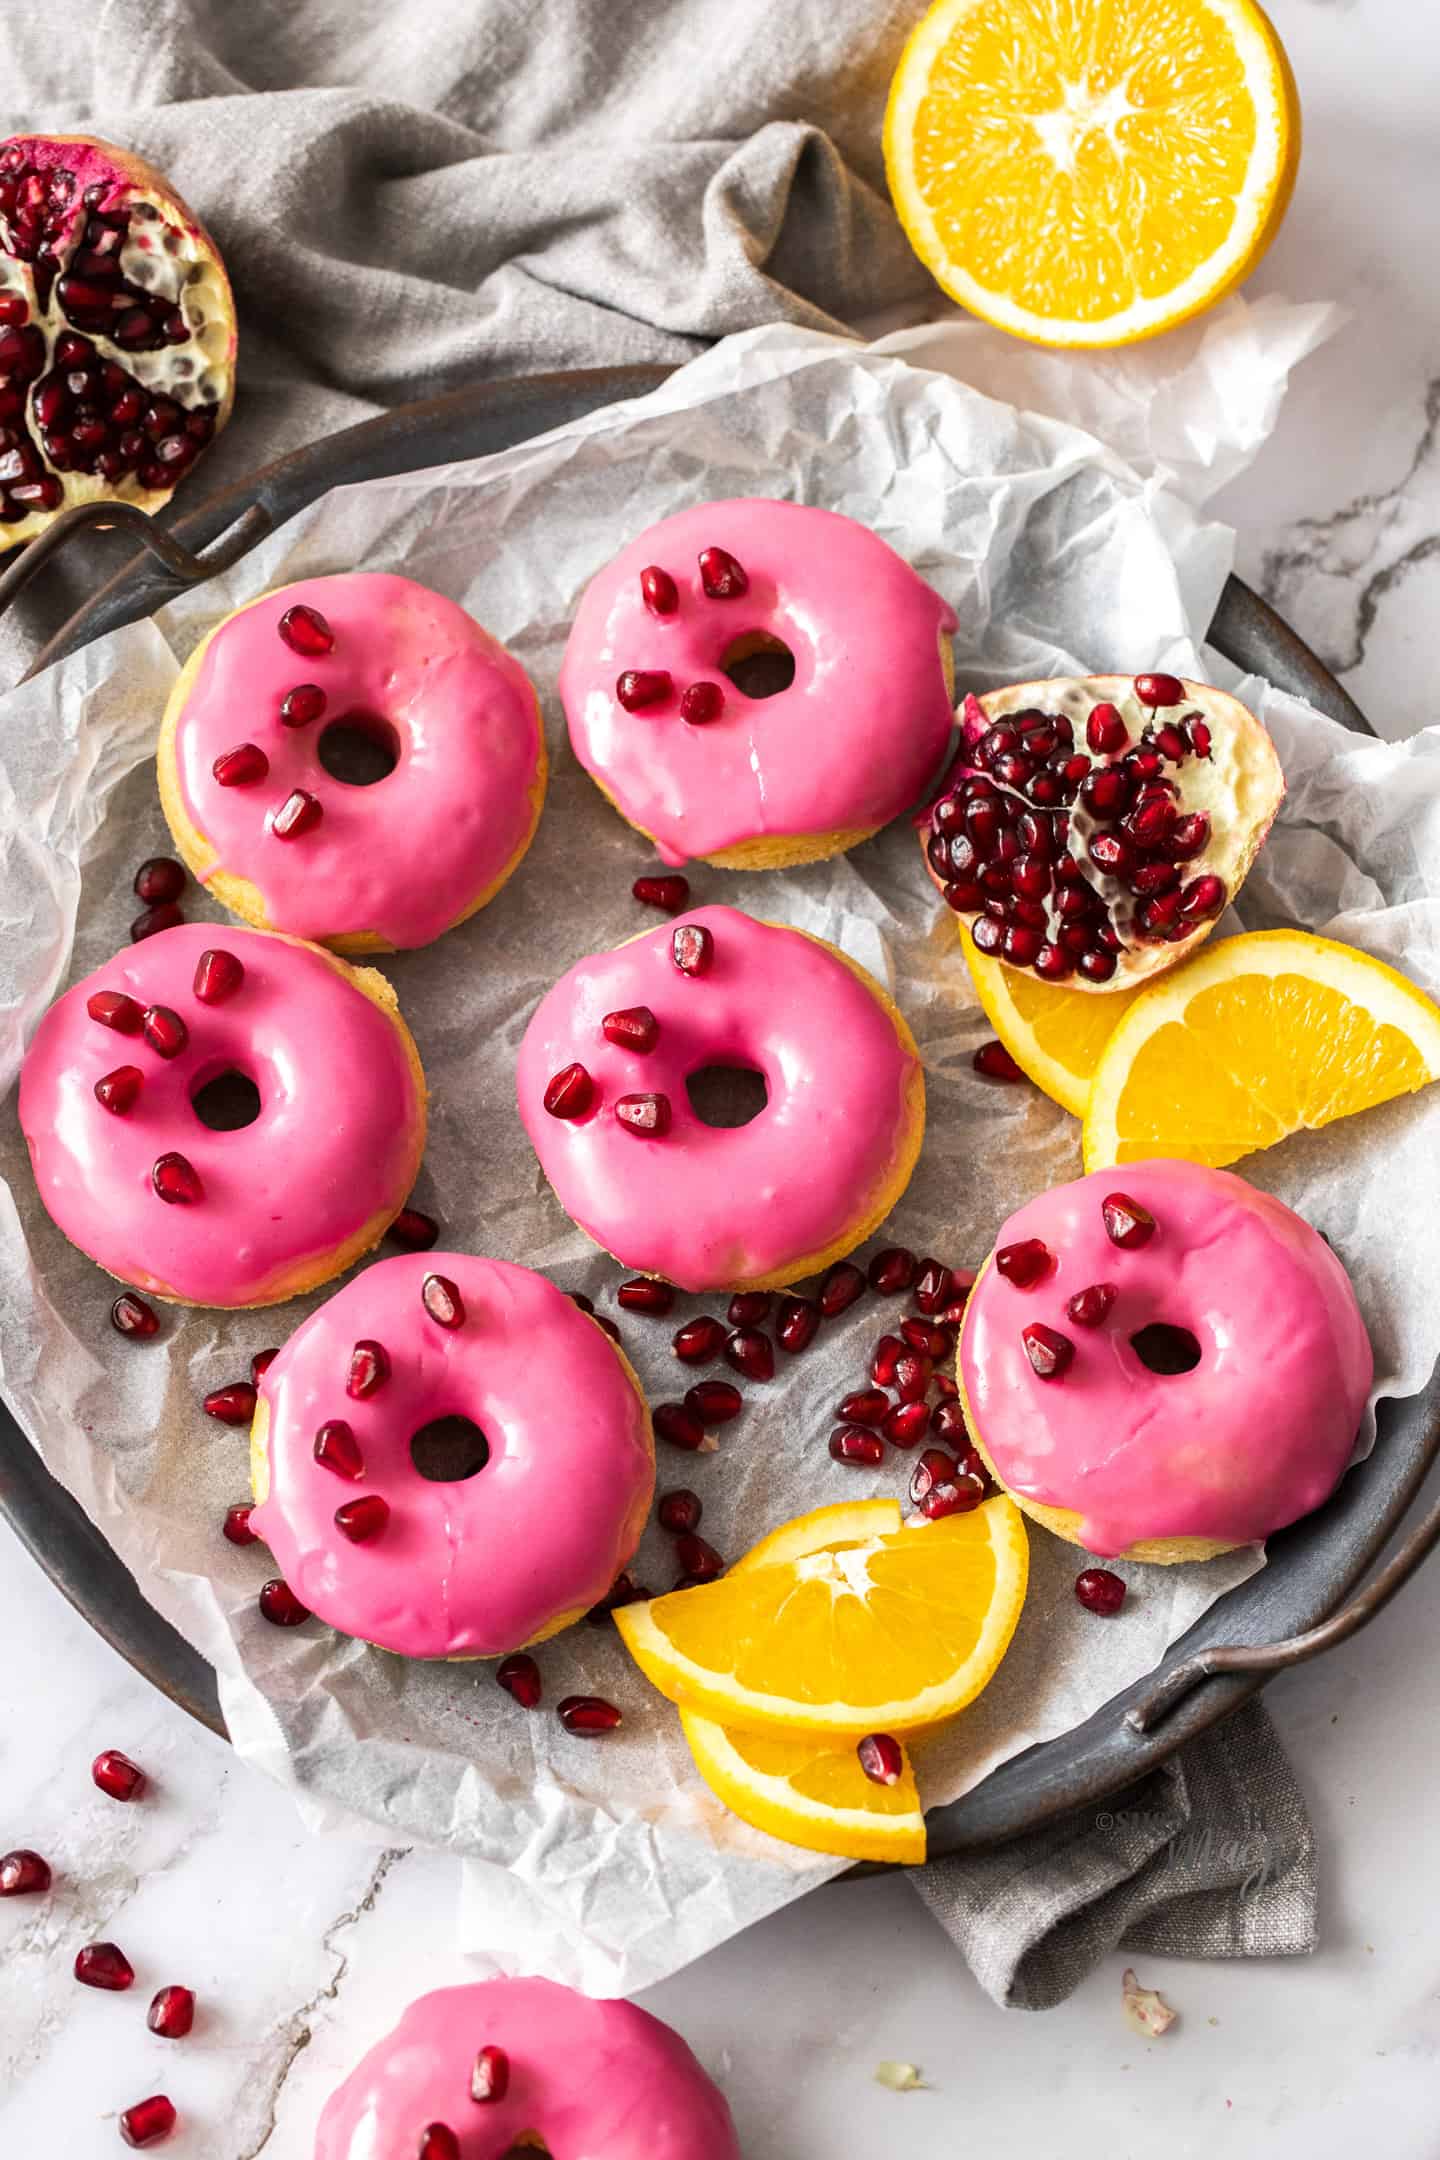 6 donuts with pink frosting, surrounded by orange slices and pomegranate seeds.